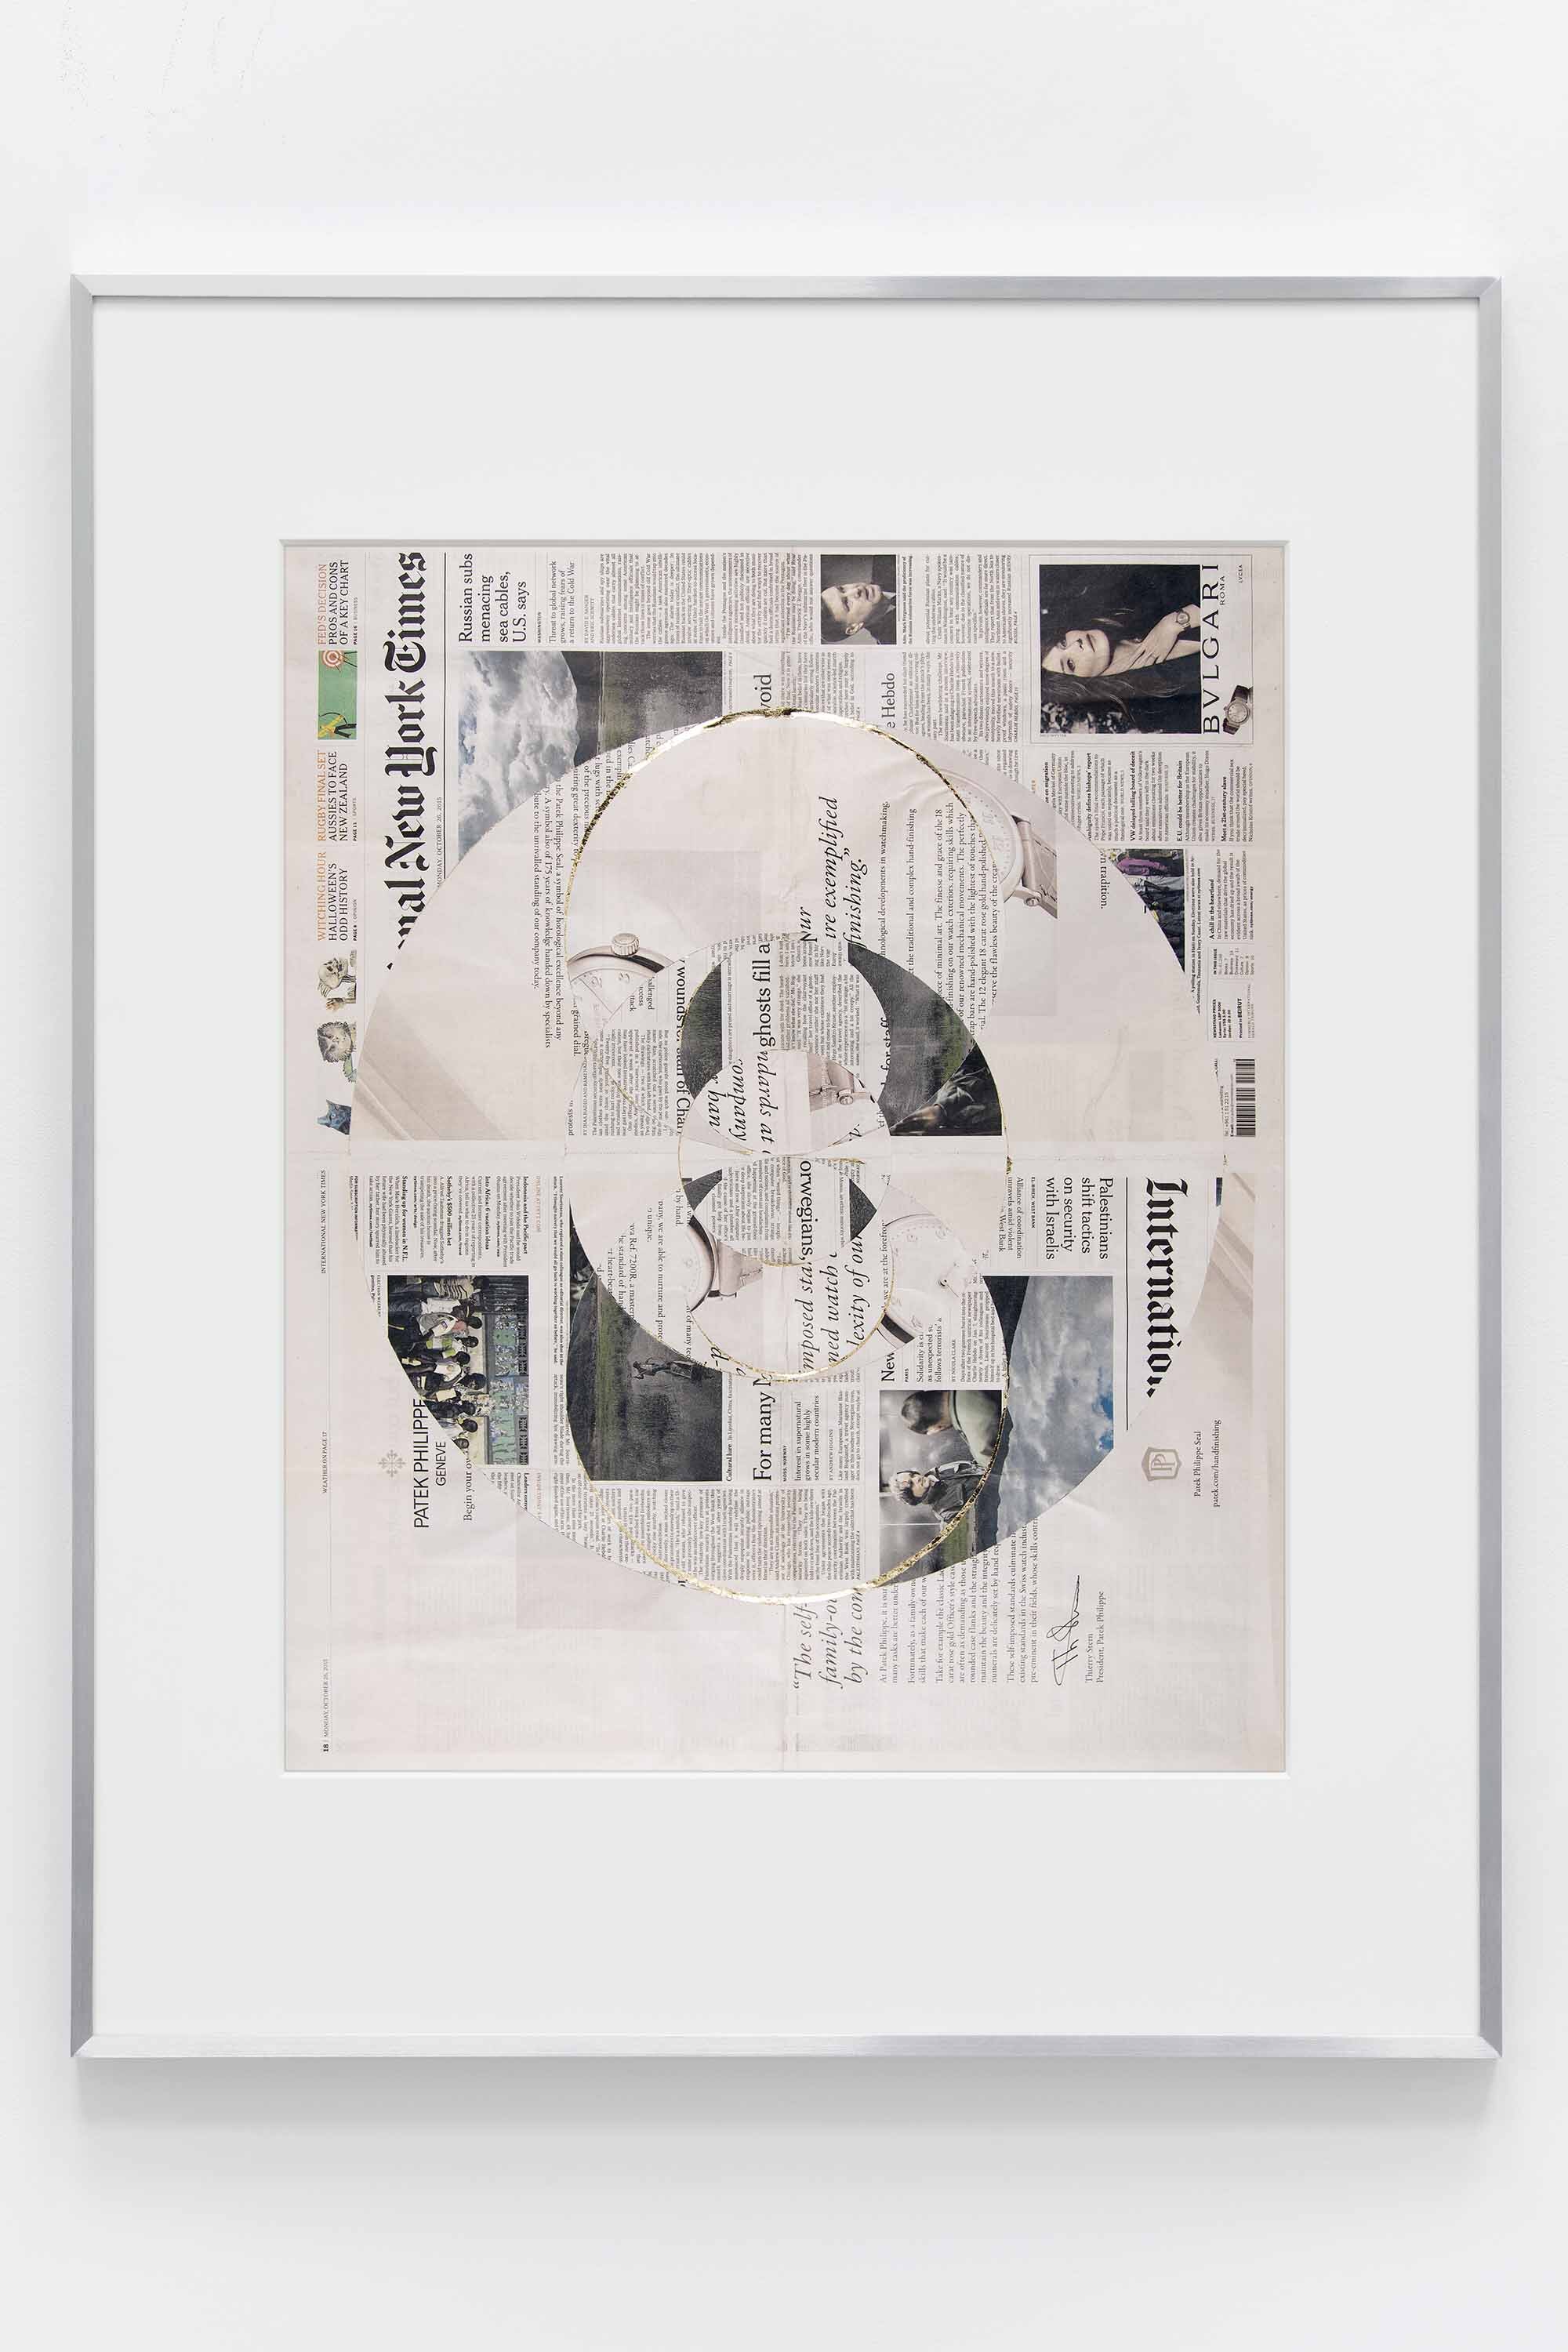   Blind Collage (Seven 180º Rotations, International New York Times: Beirut, Lebanon, Monday, October 26, 2015)    2021   Newspaper, tape, and 22 karat gold leaf  39 1/8 x 31 1/4 inches  Exhibition:   Foreign Correspondence, 2021  